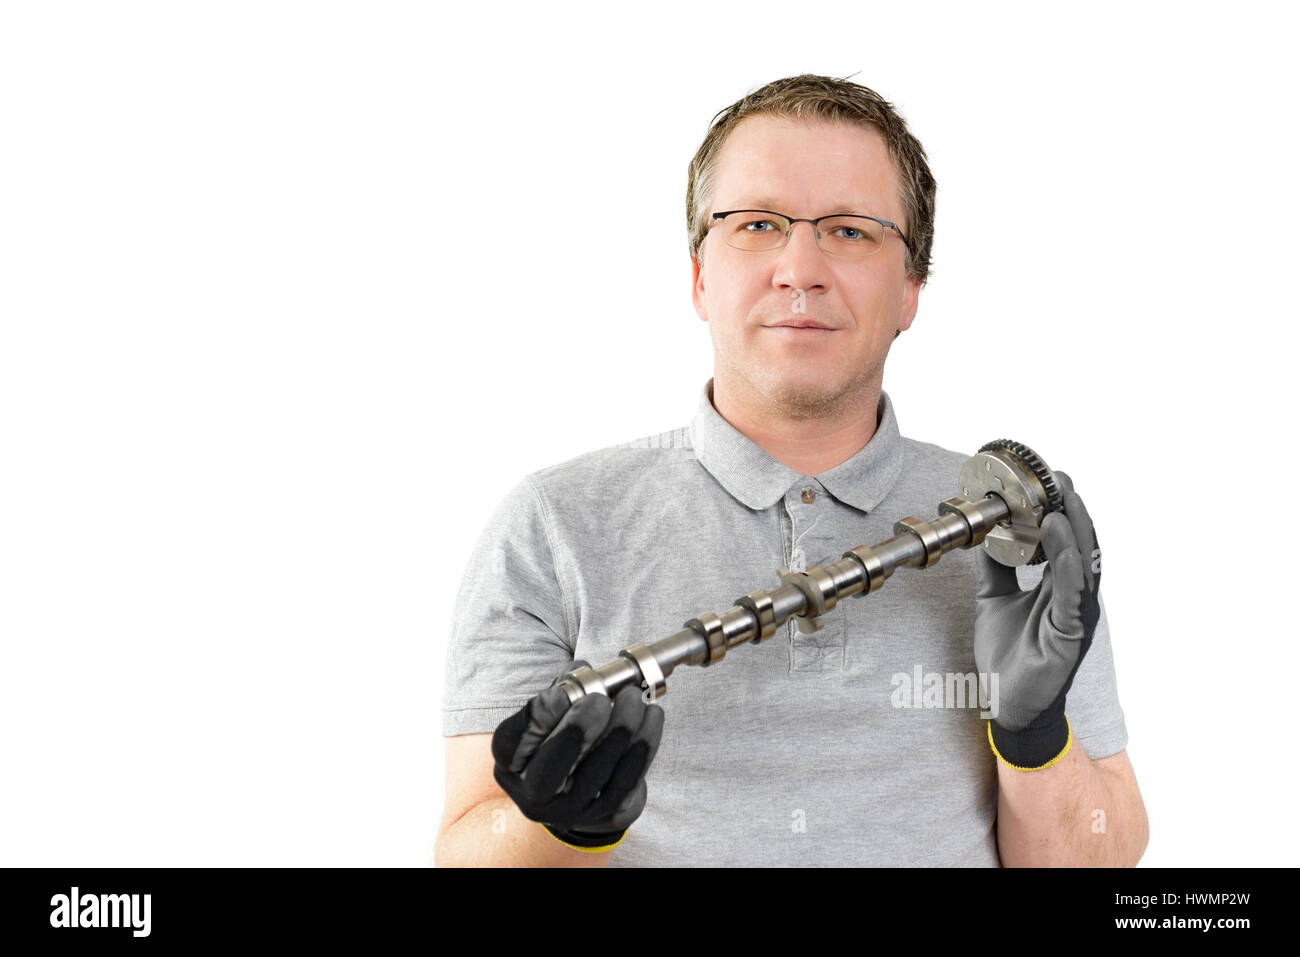 Car mechanic keeps the camshaft ready. New car parts for service and repair Stock Photo